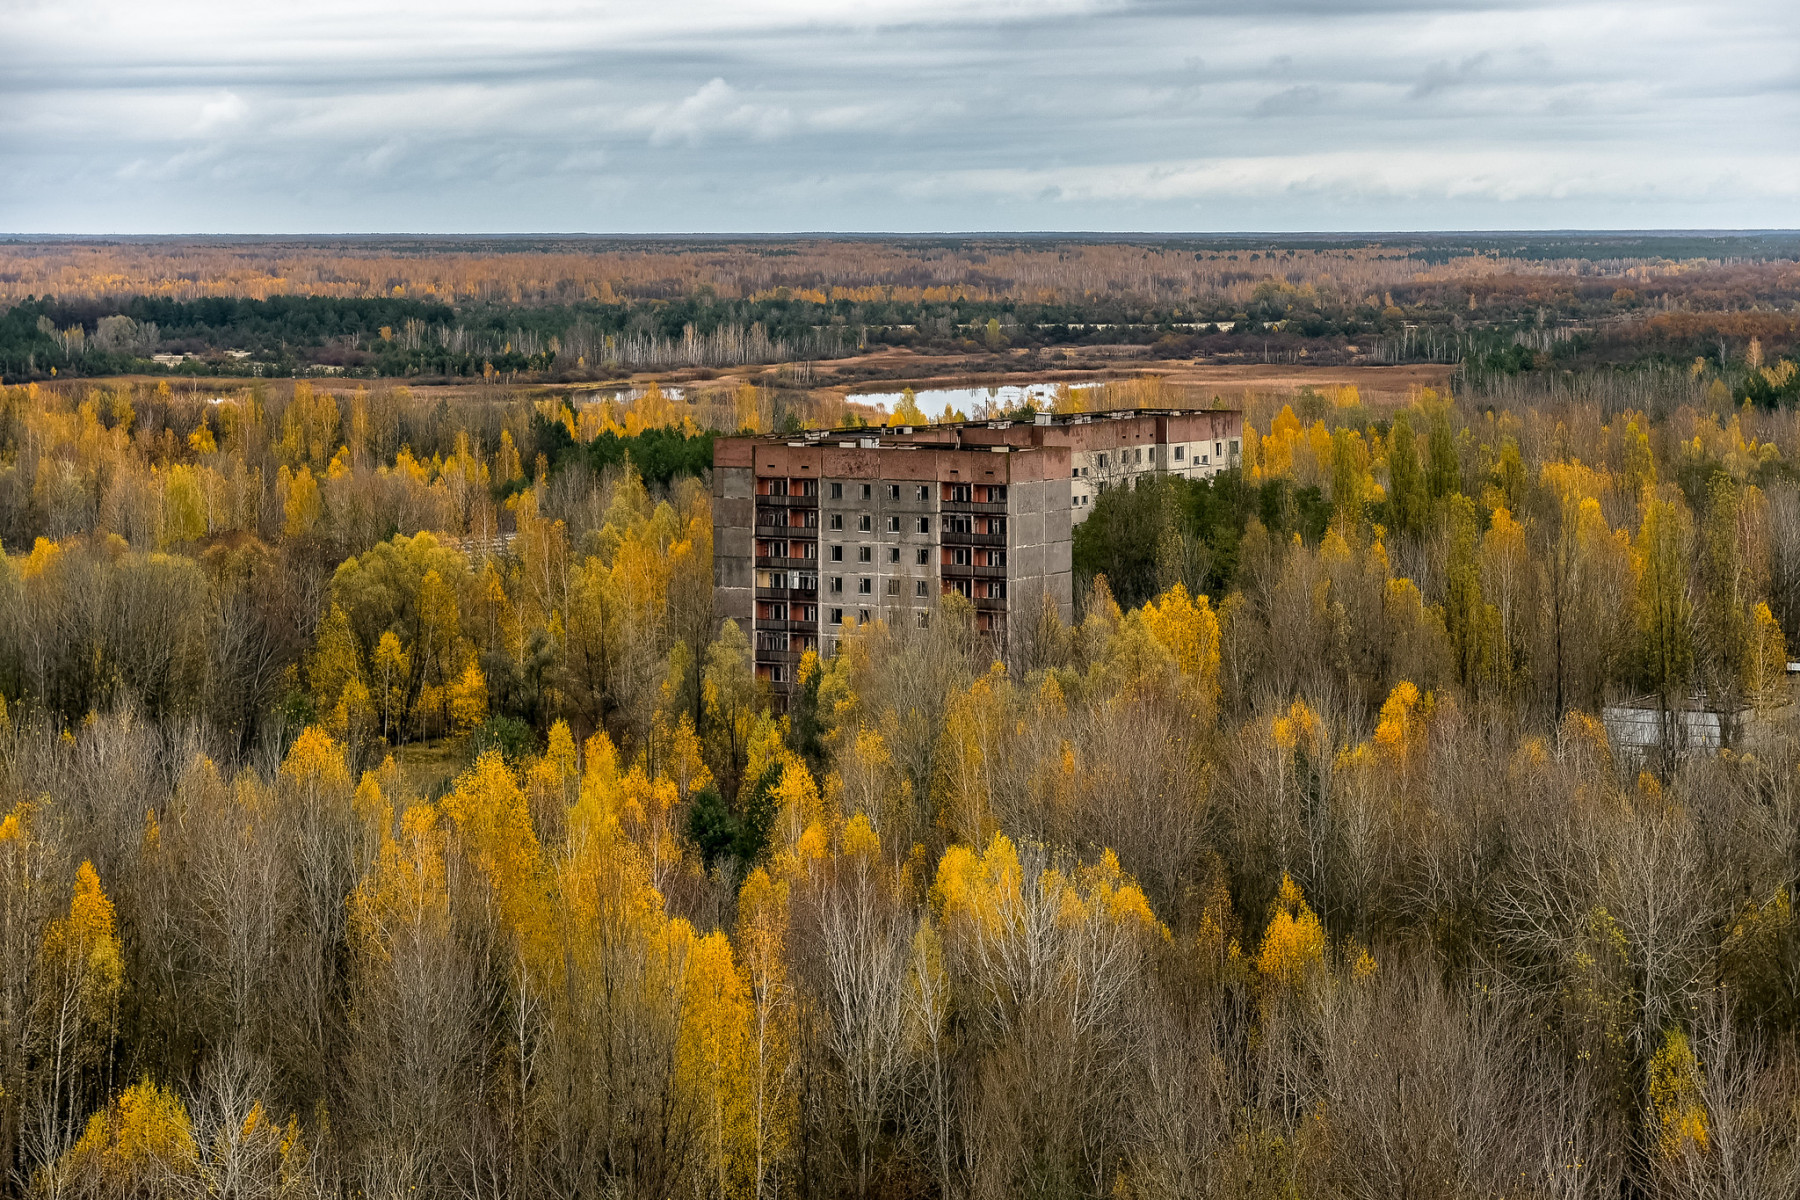 A grey and dilapidated building towers over an autumnal forest inside the Chernobyl Exclusion Zone.